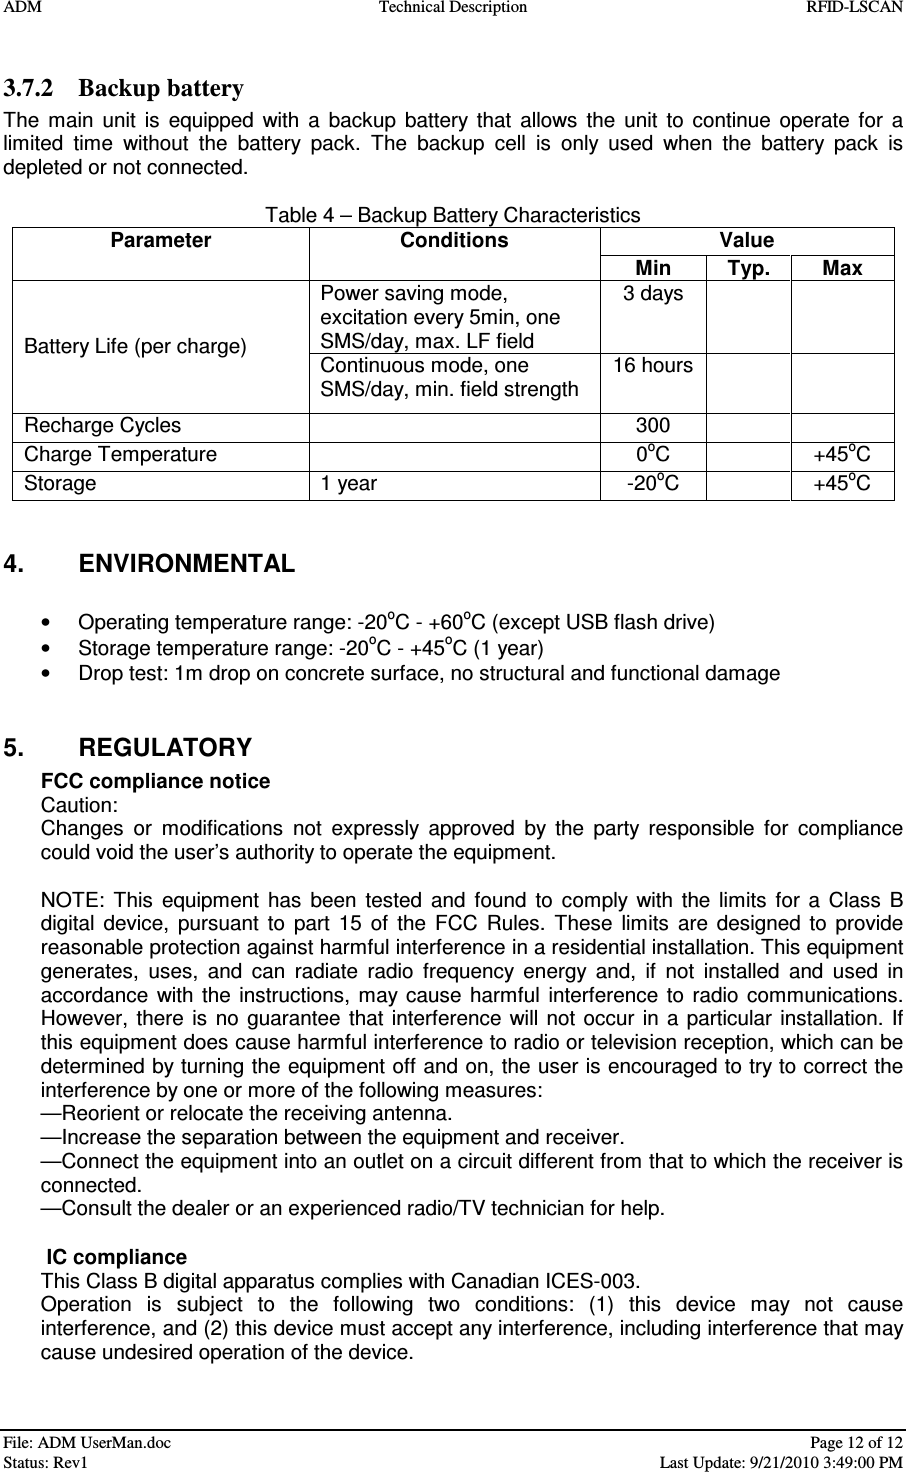 ADM  Technical Description  RFID-LSCAN   File: ADM UserMan.doc    Page 12 of 12  Status: Rev1    Last Update: 9/21/2010 3:49:00 PM  3.7.2 Backup battery The  main  unit  is  equipped  with  a  backup  battery  that  allows  the  unit  to  continue  operate  for  a limited  time  without  the  battery  pack.  The  backup  cell  is  only  used  when  the  battery  pack  is depleted or not connected.   Table 4 – Backup Battery Characteristics Value  Parameter  Conditions Min   Typ.  Max Power saving mode, excitation every 5min, one SMS/day, max. LF field  3 days     Battery Life (per charge)  Continuous mode, one SMS/day, min. field strength 16 hours     Recharge Cycles    300     Charge Temperature    0oC    +45oC Storage  1 year  -20oC    +45oC   4.  ENVIRONMENTAL  •  Operating temperature range: -20oC - +60oC (except USB flash drive) •  Storage temperature range: -20oC - +45oC (1 year) •  Drop test: 1m drop on concrete surface, no structural and functional damage   5.  REGULATORY FCC compliance notice Caution: Changes  or  modifications  not  expressly  approved  by  the  party  responsible  for  compliance could void the user’s authority to operate the equipment.  NOTE:  This  equipment  has  been  tested  and  found  to  comply  with  the  limits  for  a  Class  B digital  device,  pursuant  to  part  15  of  the  FCC  Rules.  These  limits  are  designed  to  provide reasonable protection against harmful interference in a residential installation. This equipment generates,  uses,  and  can  radiate  radio  frequency  energy  and,  if  not  installed  and  used  in accordance  with  the  instructions,  may  cause  harmful  interference  to  radio  communications. However,  there  is no guarantee  that  interference  will  not occur  in a  particular  installation.  If this equipment does cause harmful interference to radio or television reception, which can be determined by turning the equipment off and on, the user is encouraged to try to correct the interference by one or more of the following measures: —Reorient or relocate the receiving antenna. —Increase the separation between the equipment and receiver. —Connect the equipment into an outlet on a circuit different from that to which the receiver is connected. —Consult the dealer or an experienced radio/TV technician for help.    IC compliance This Class B digital apparatus complies with Canadian ICES-003. Operation  is  subject  to  the  following  two  conditions:  (1)  this  device  may  not  cause interference, and (2) this device must accept any interference, including interference that may cause undesired operation of the device.   